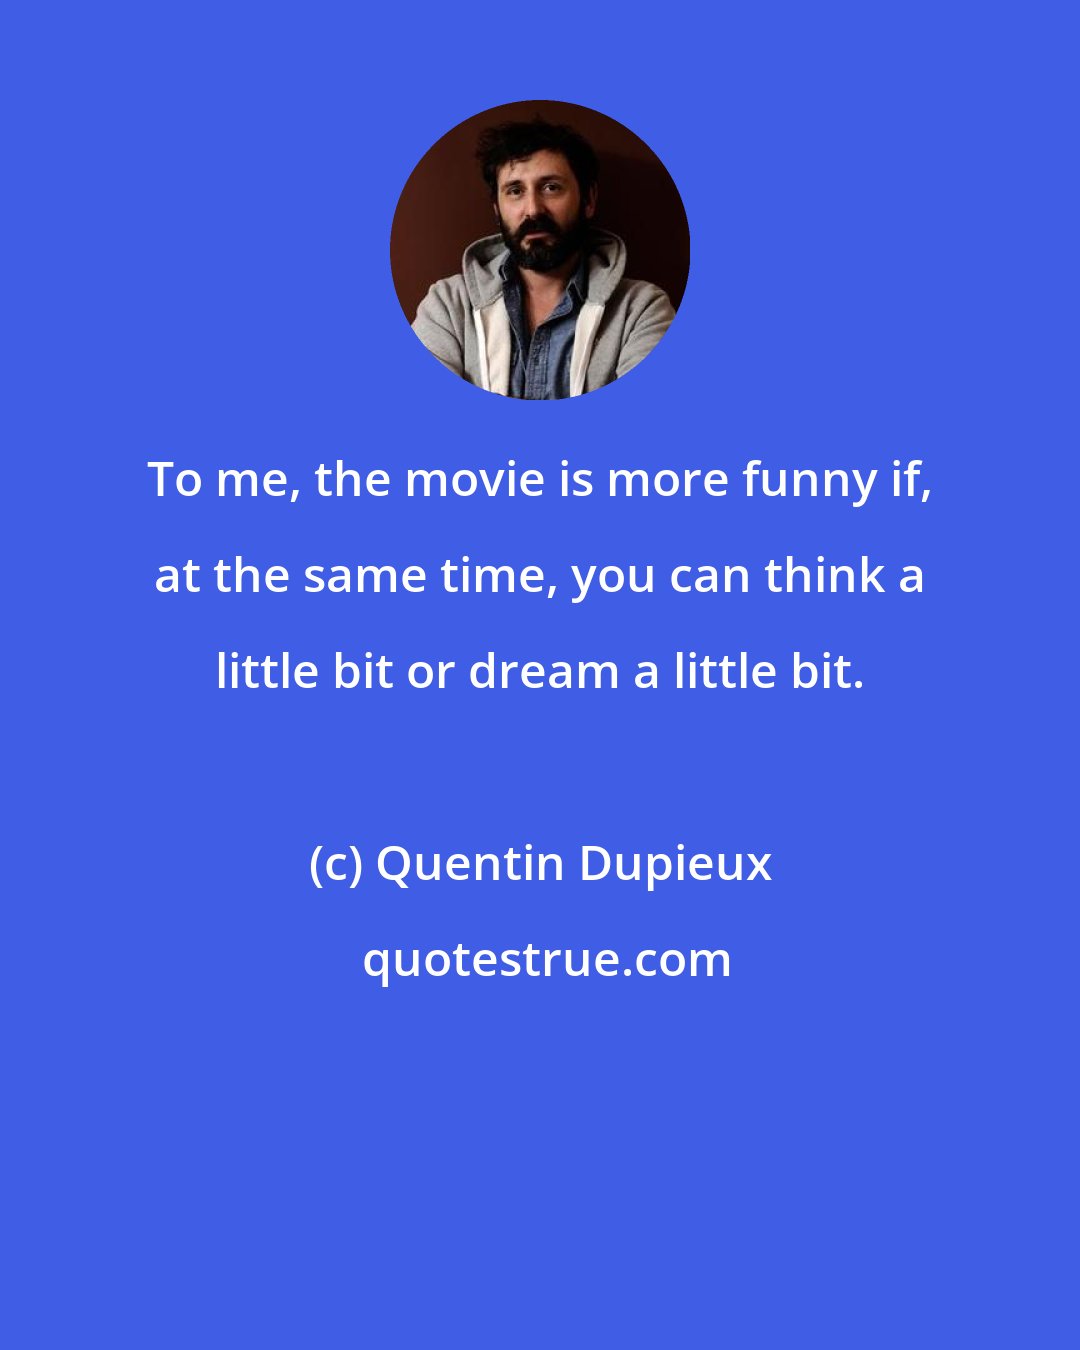 Quentin Dupieux: To me, the movie is more funny if, at the same time, you can think a little bit or dream a little bit.